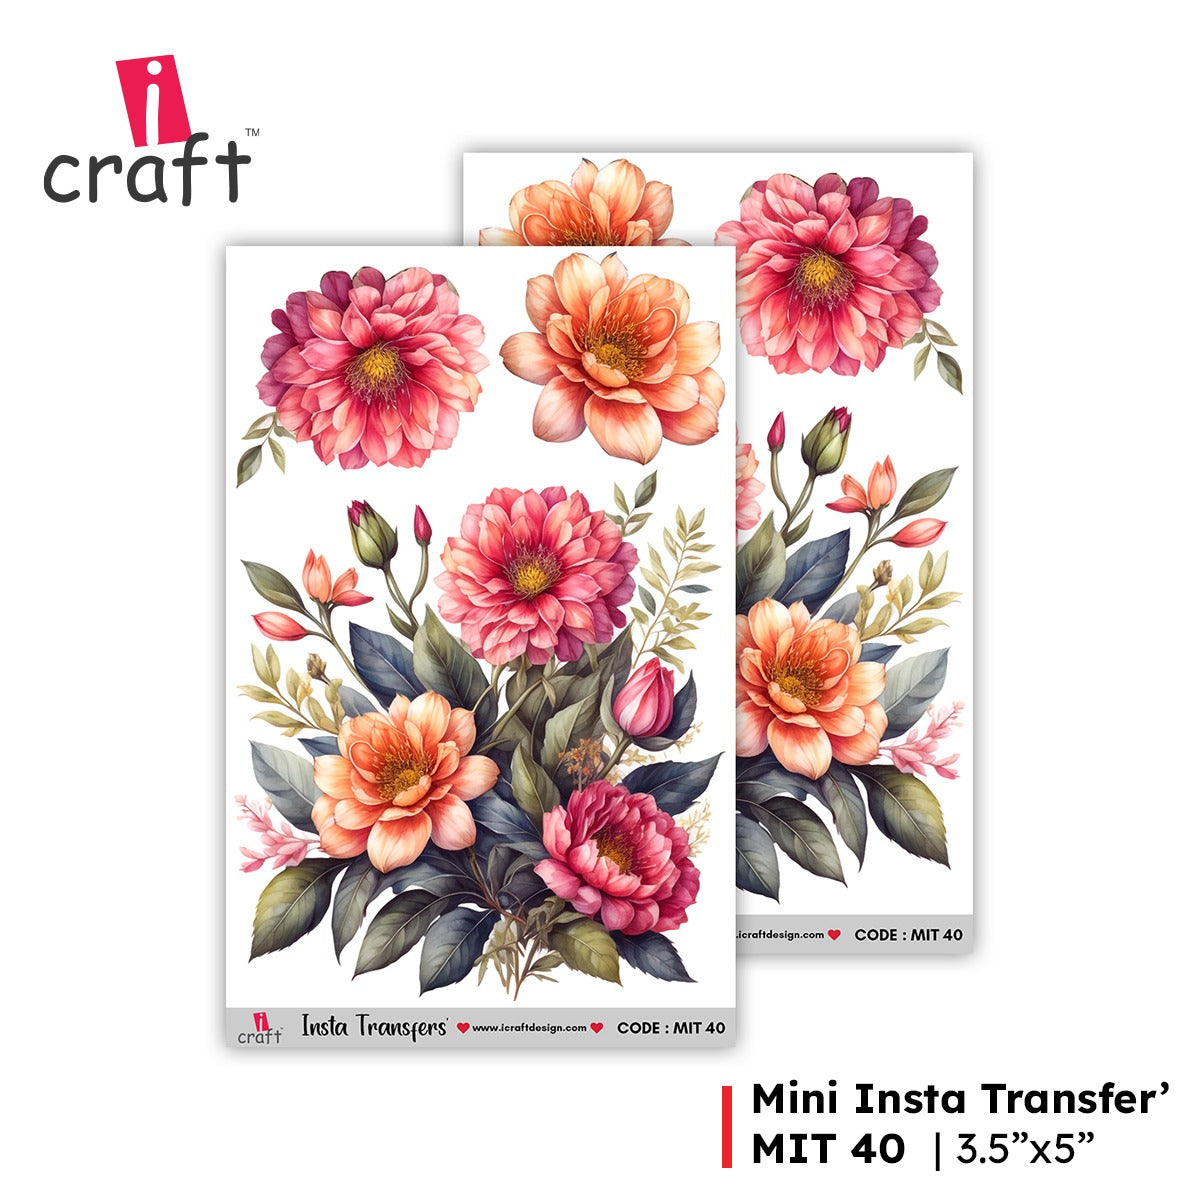 iCraft Water Transfer Stickers- Best use for Resin, Fabric, Plastic, MDF & Glass - Decorative Decals in Floral, Quotes & More (3.5" x 5")-MIT 40